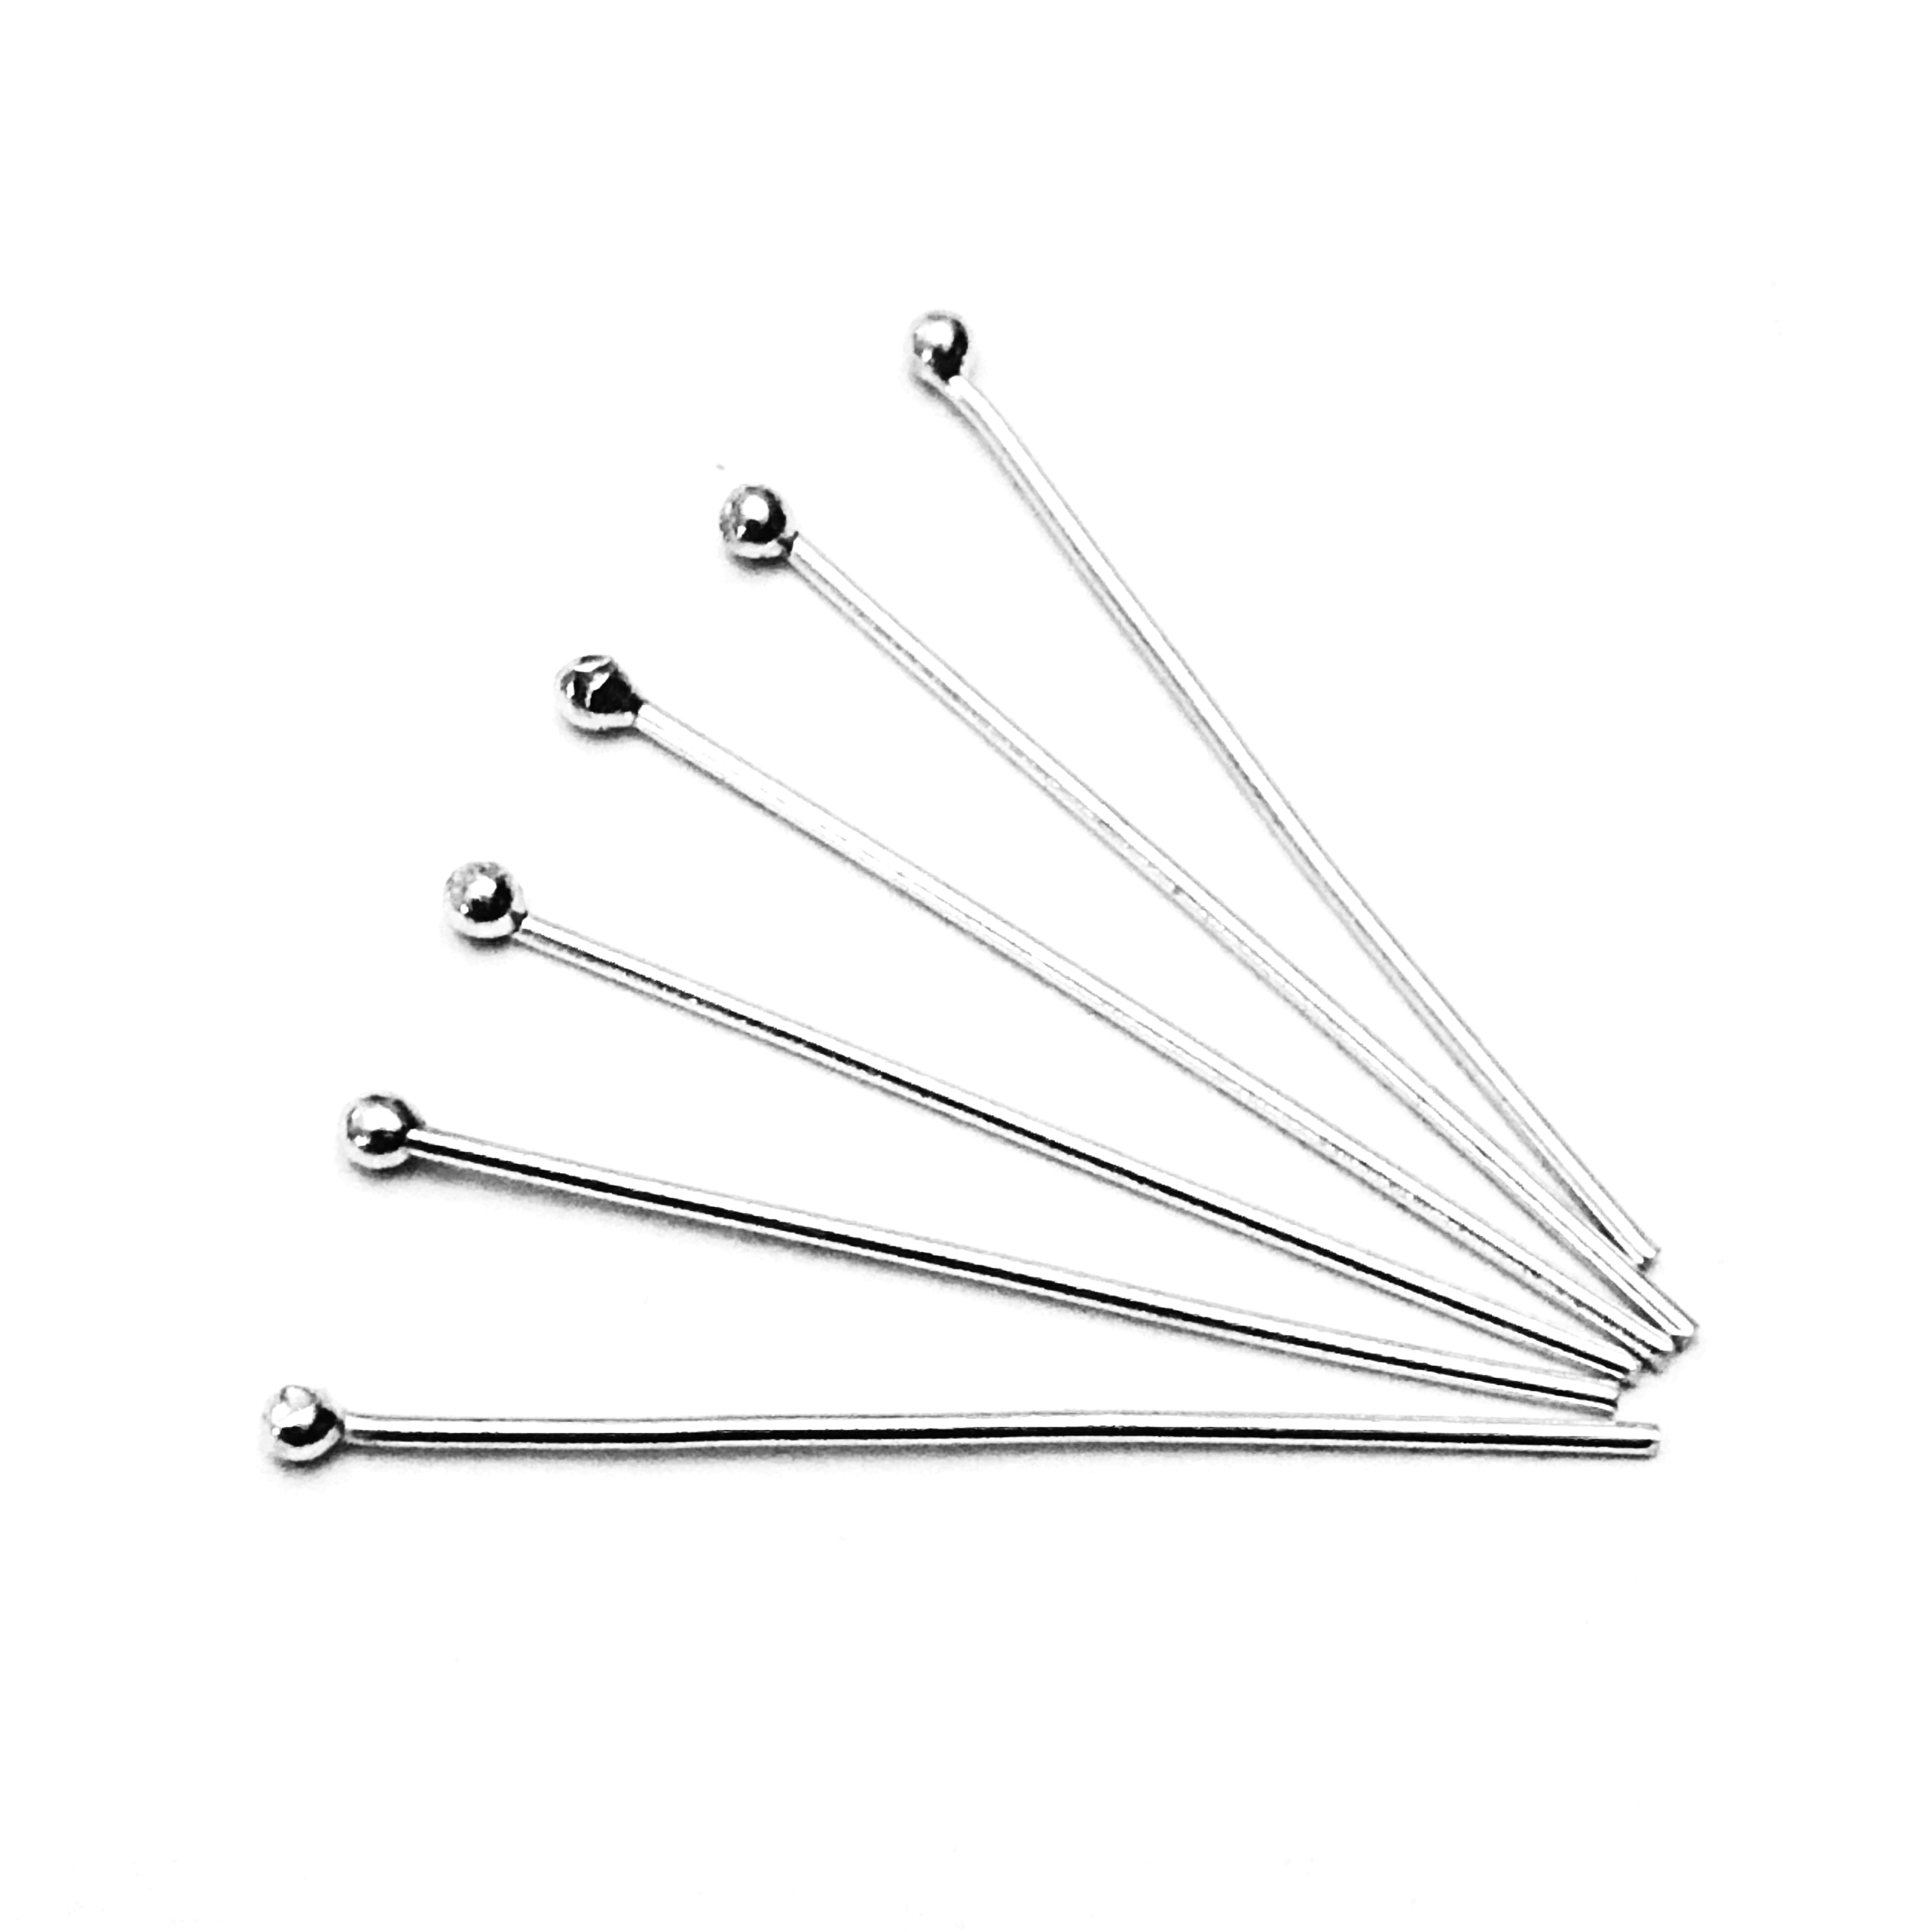 Lot of 7 Silver Wire Pin Needle Gauge 20 0.7 mm 1 gram ID # 4507 - Click Image to Close